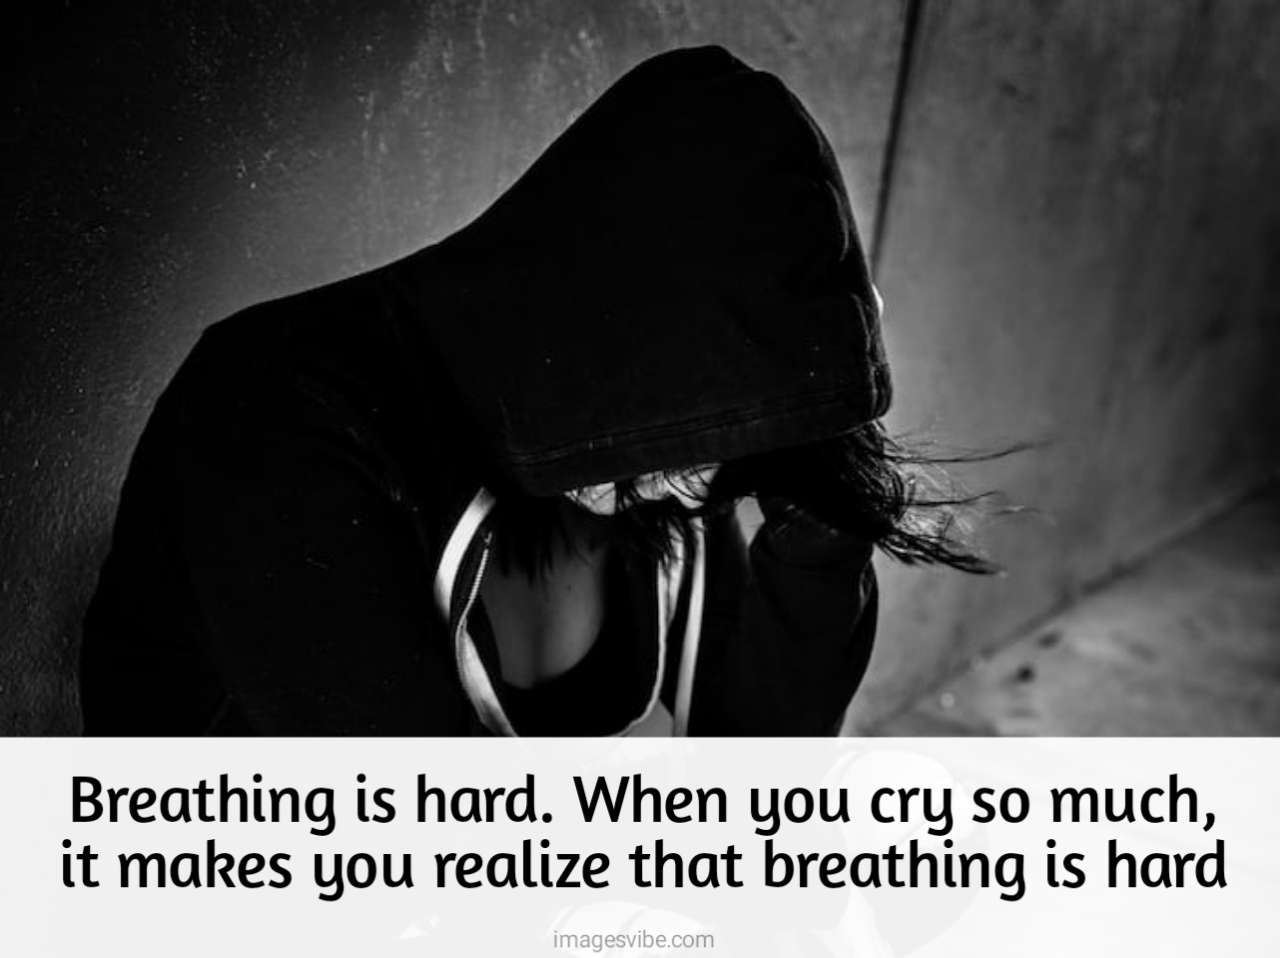 Sad Mood Off images With Quotes & Messages in 2023 - Images Vibe